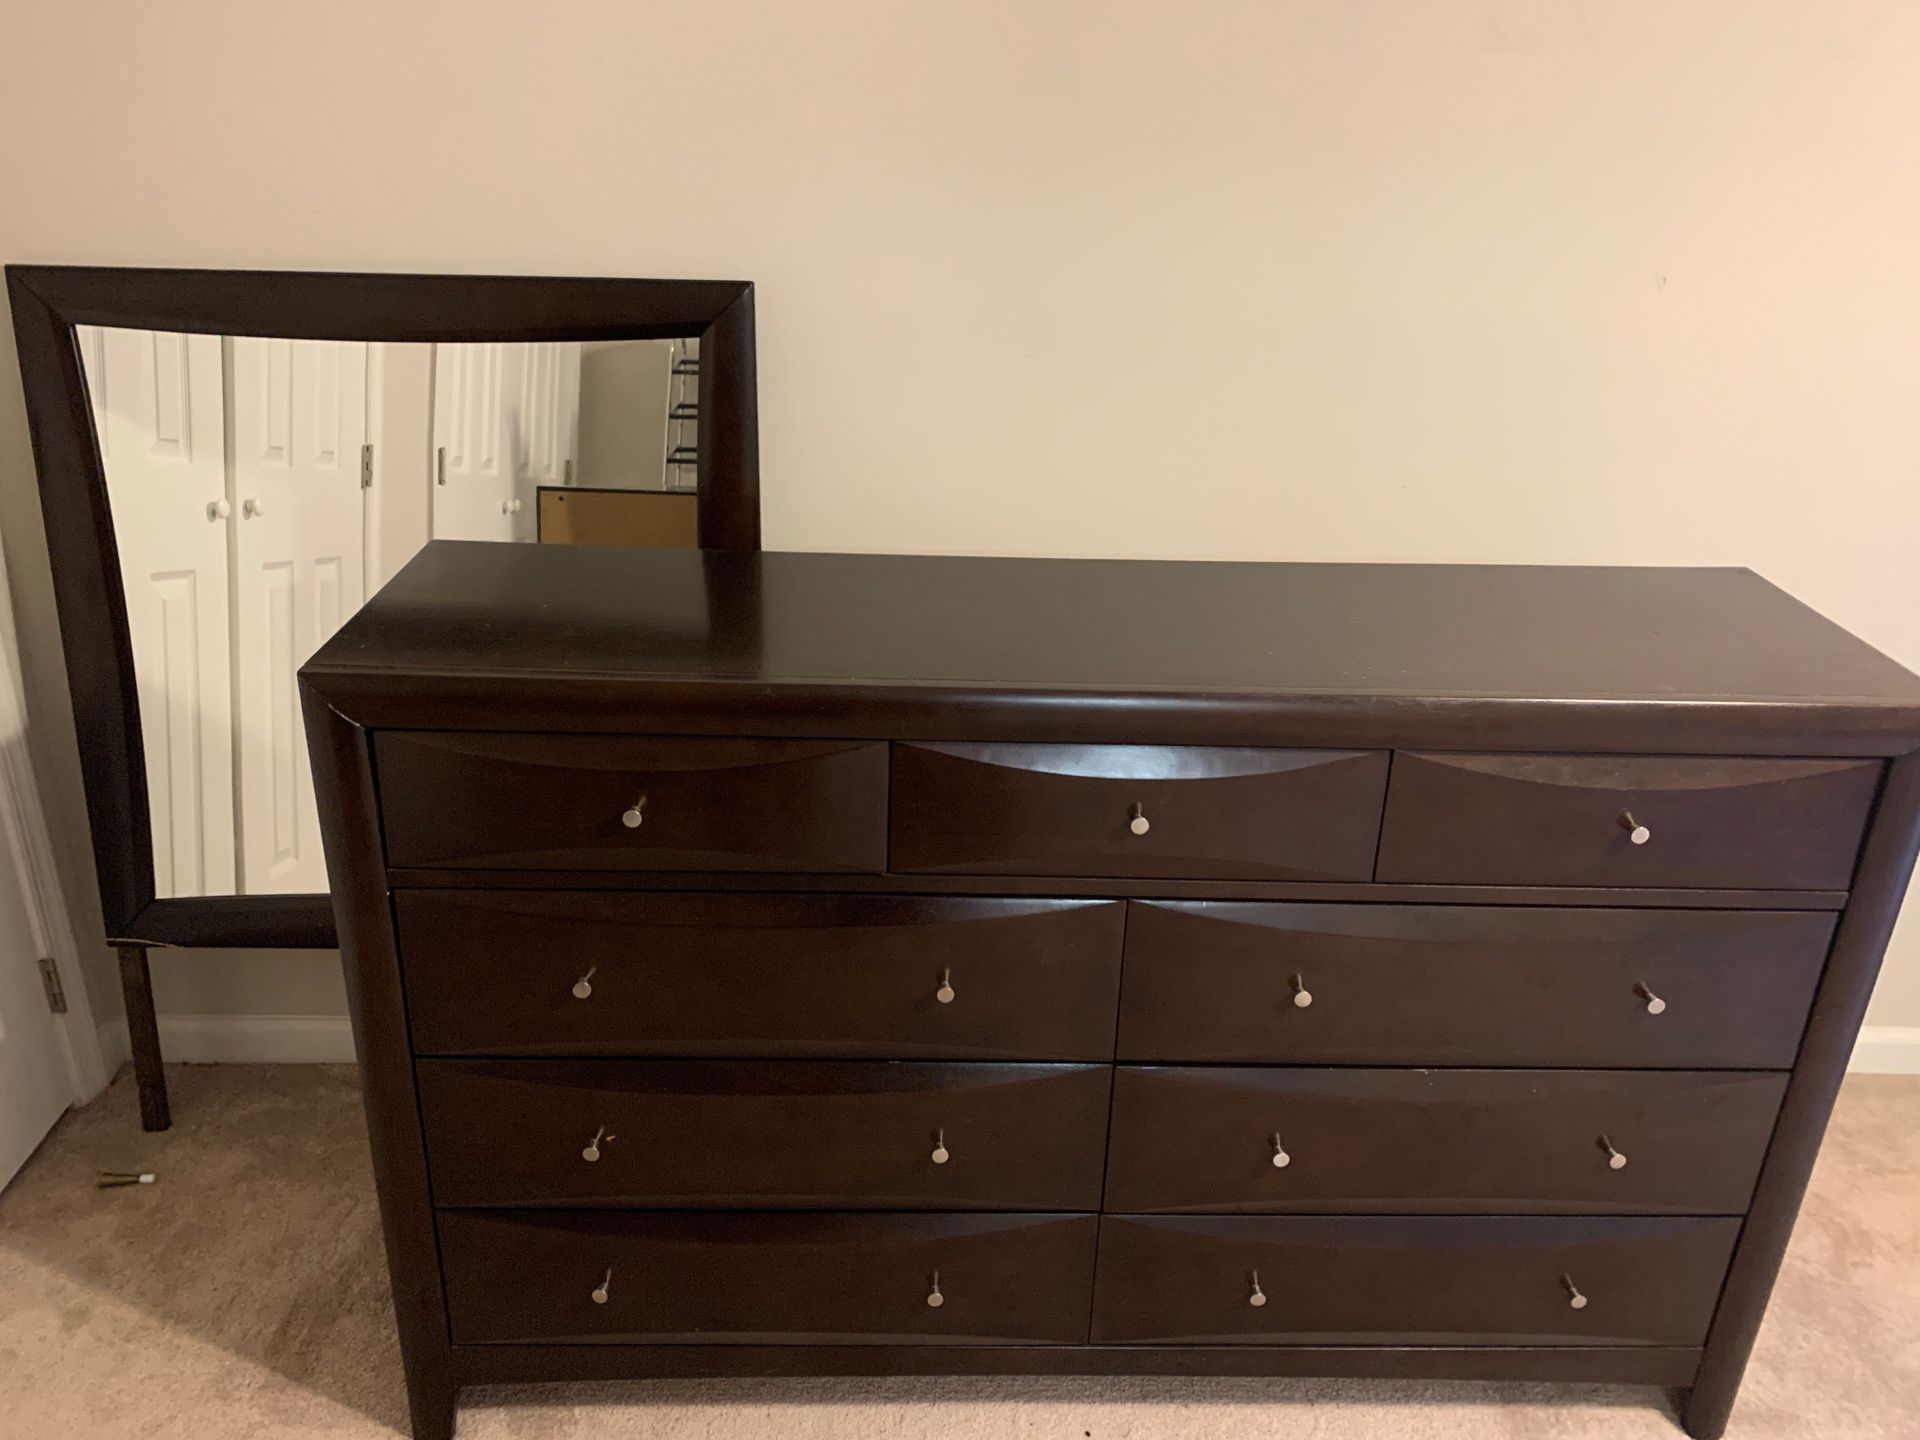 Bedroom Set (no bed): dresser w/ mirror, media chest, two night stands